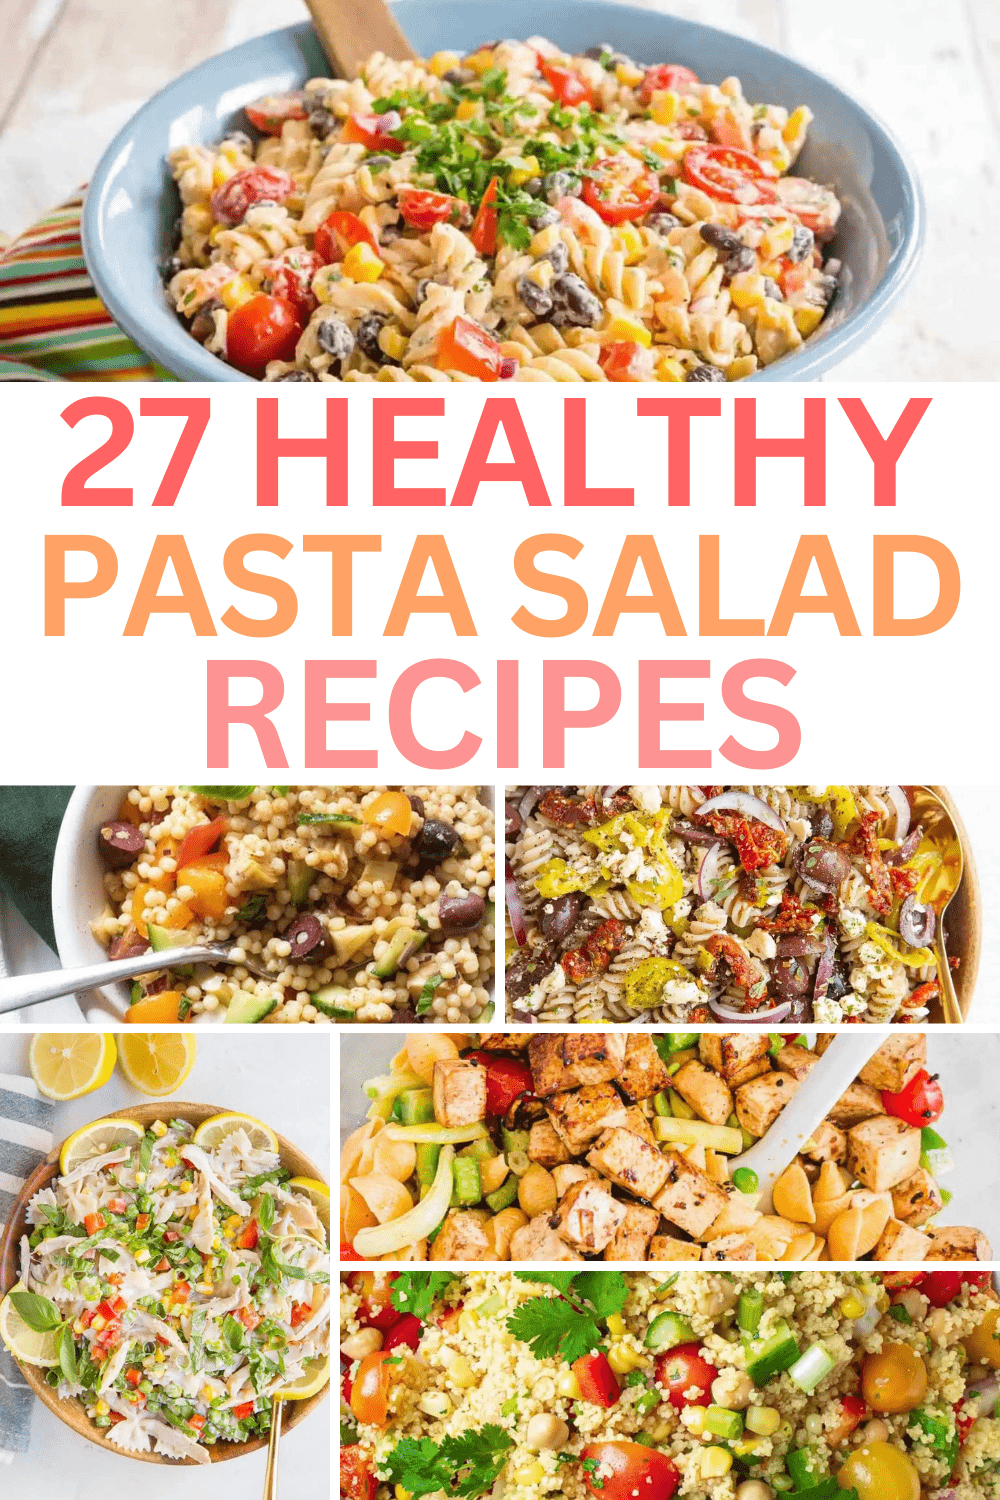 Healthy low calorie pasta salad recipes for summer! These clean eating low carb pasta salads are the perfect cold salads to eat for summer lunches or light easy summer dinners. Healthy pasta salad recipes vegetarian, vegan pasta salad recipes healthy, gluten free pasta salad recipes healthy, healthy pasta salad recipes clean eating low carb, healthy pasta salad recipes clean eating lunch ideas, healthy pasta salad recipes low calorie, easy healthy pasta salad recipes clean eating low calorie.